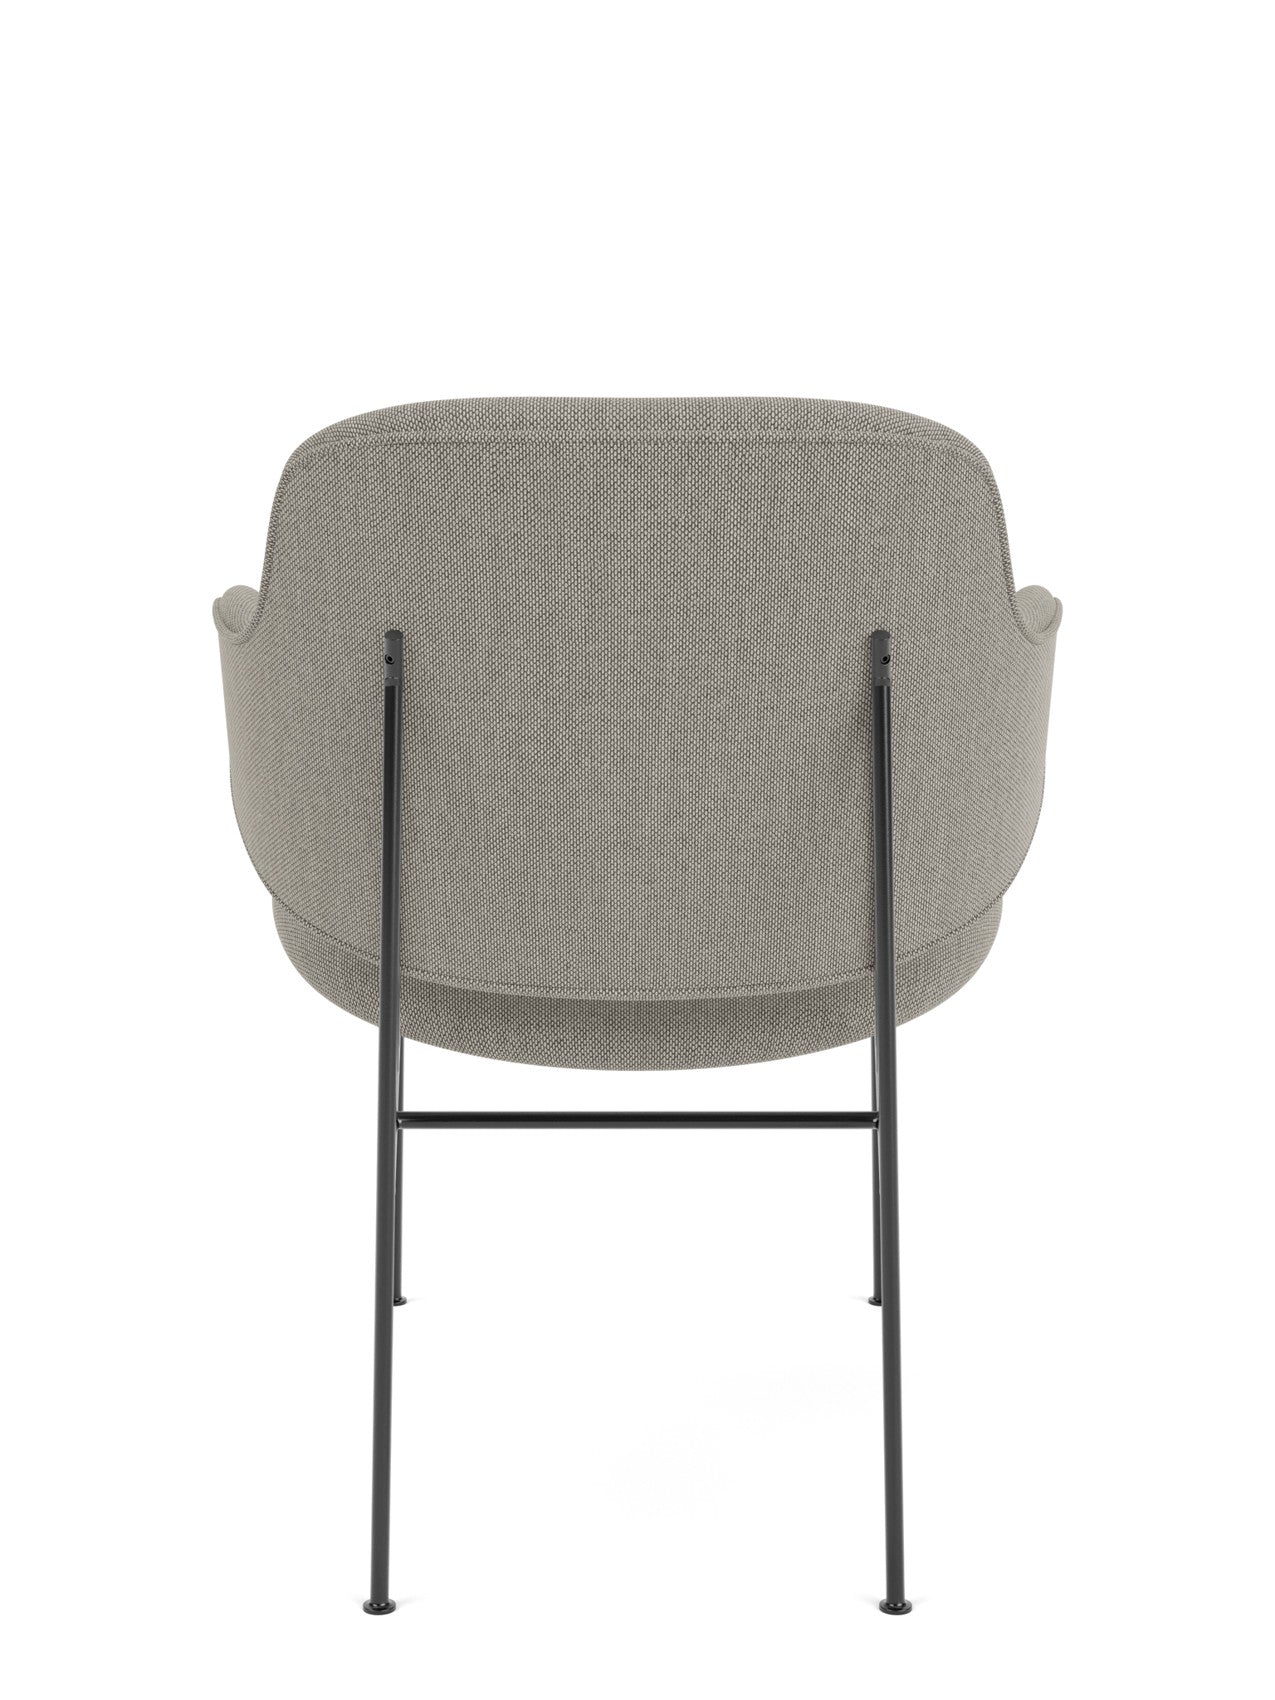 The Penguin Lounge Chair, Fully Upholstered